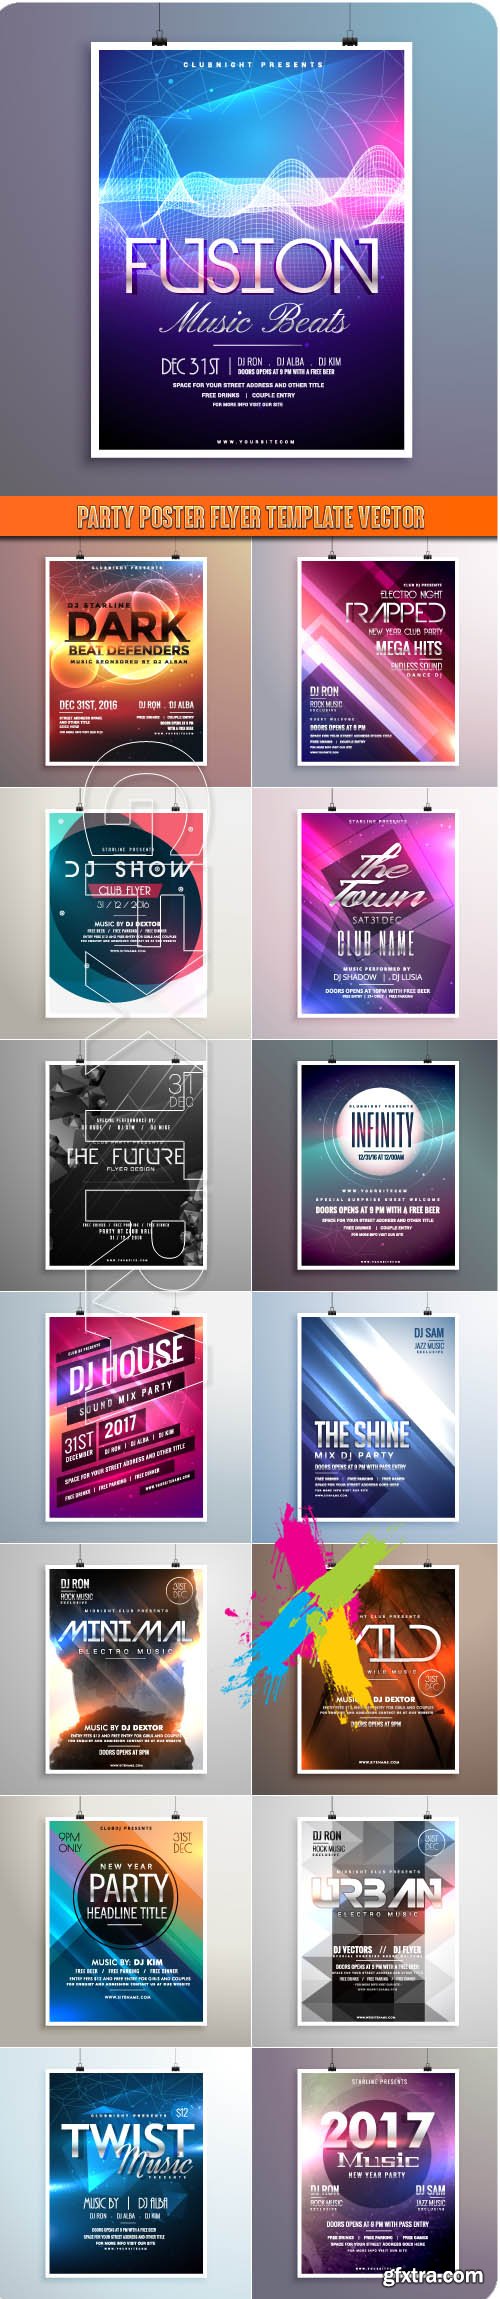 Party poster flyer template vector